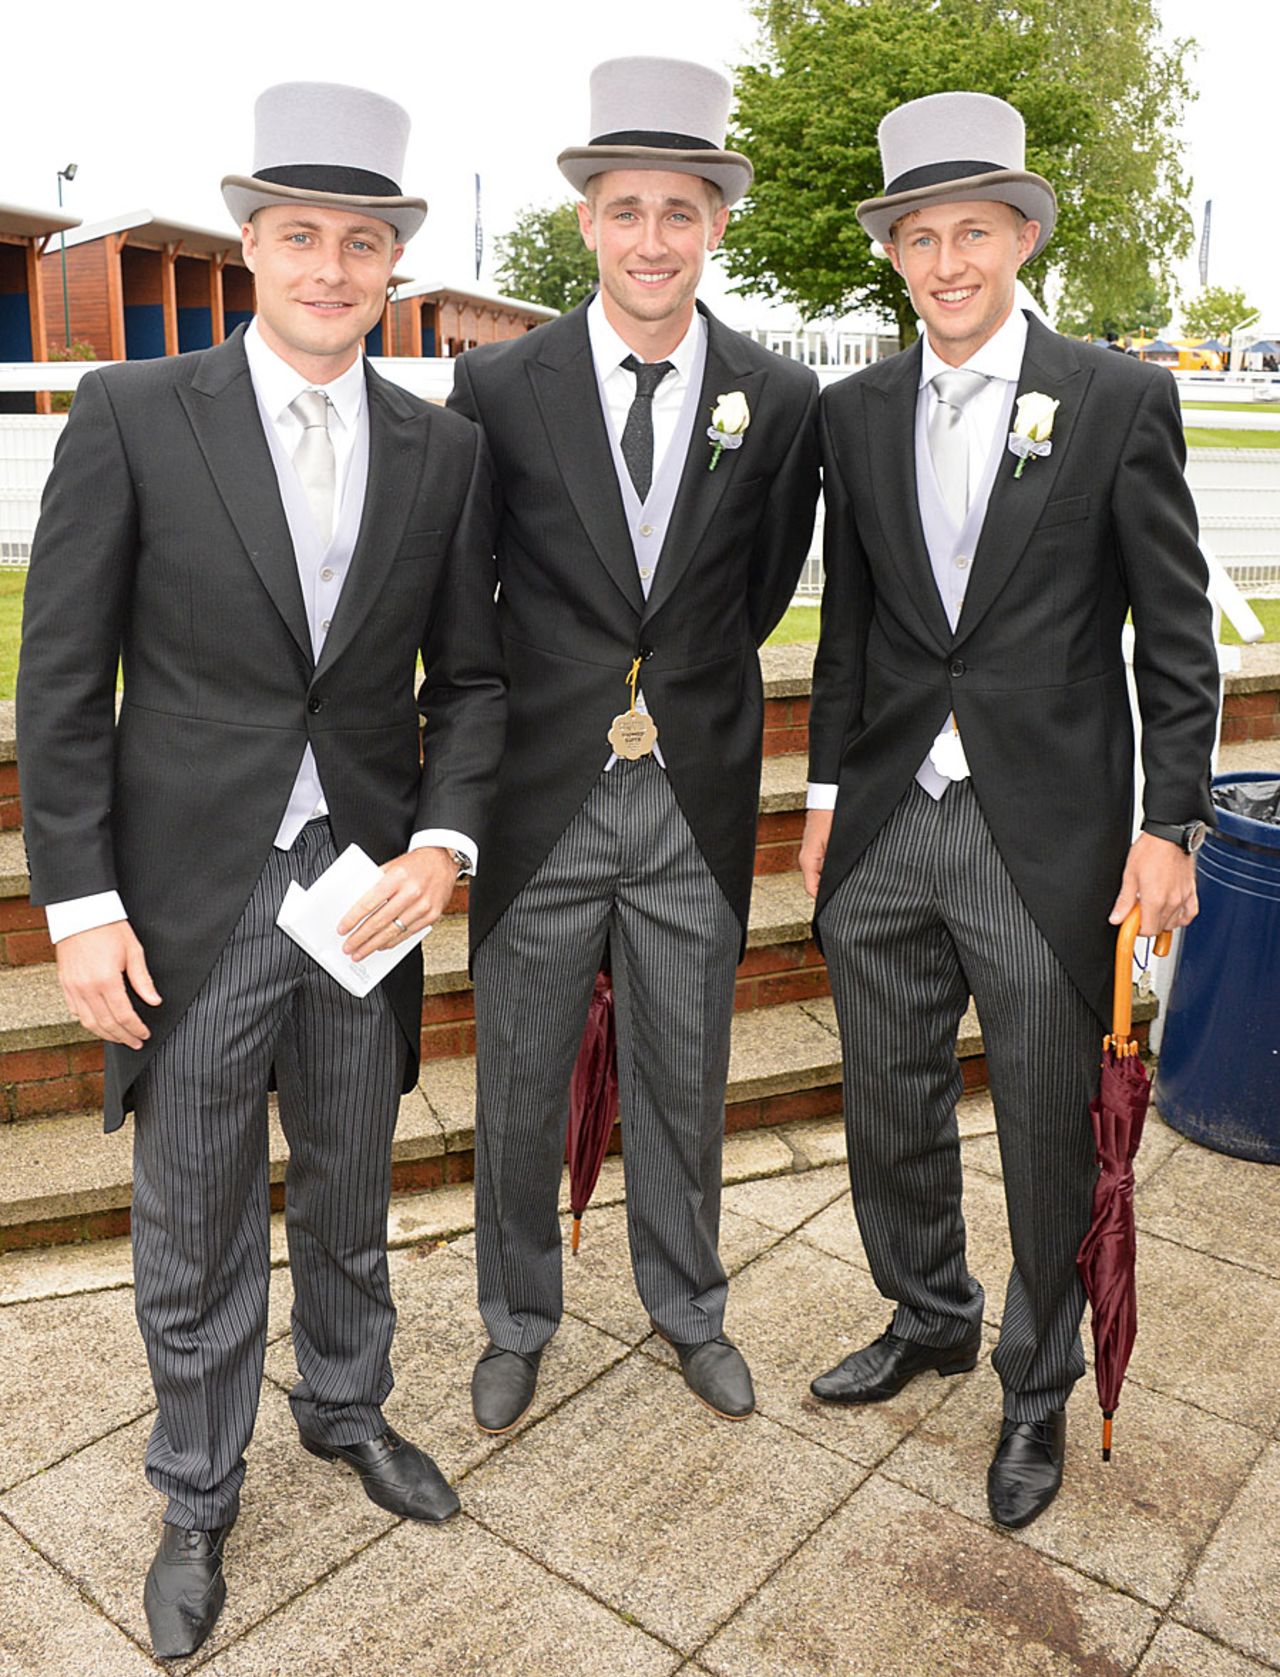 Luke Wright, Chris Woakes and Joe Root at the Investec Derby, Epsom, June 7, 2014